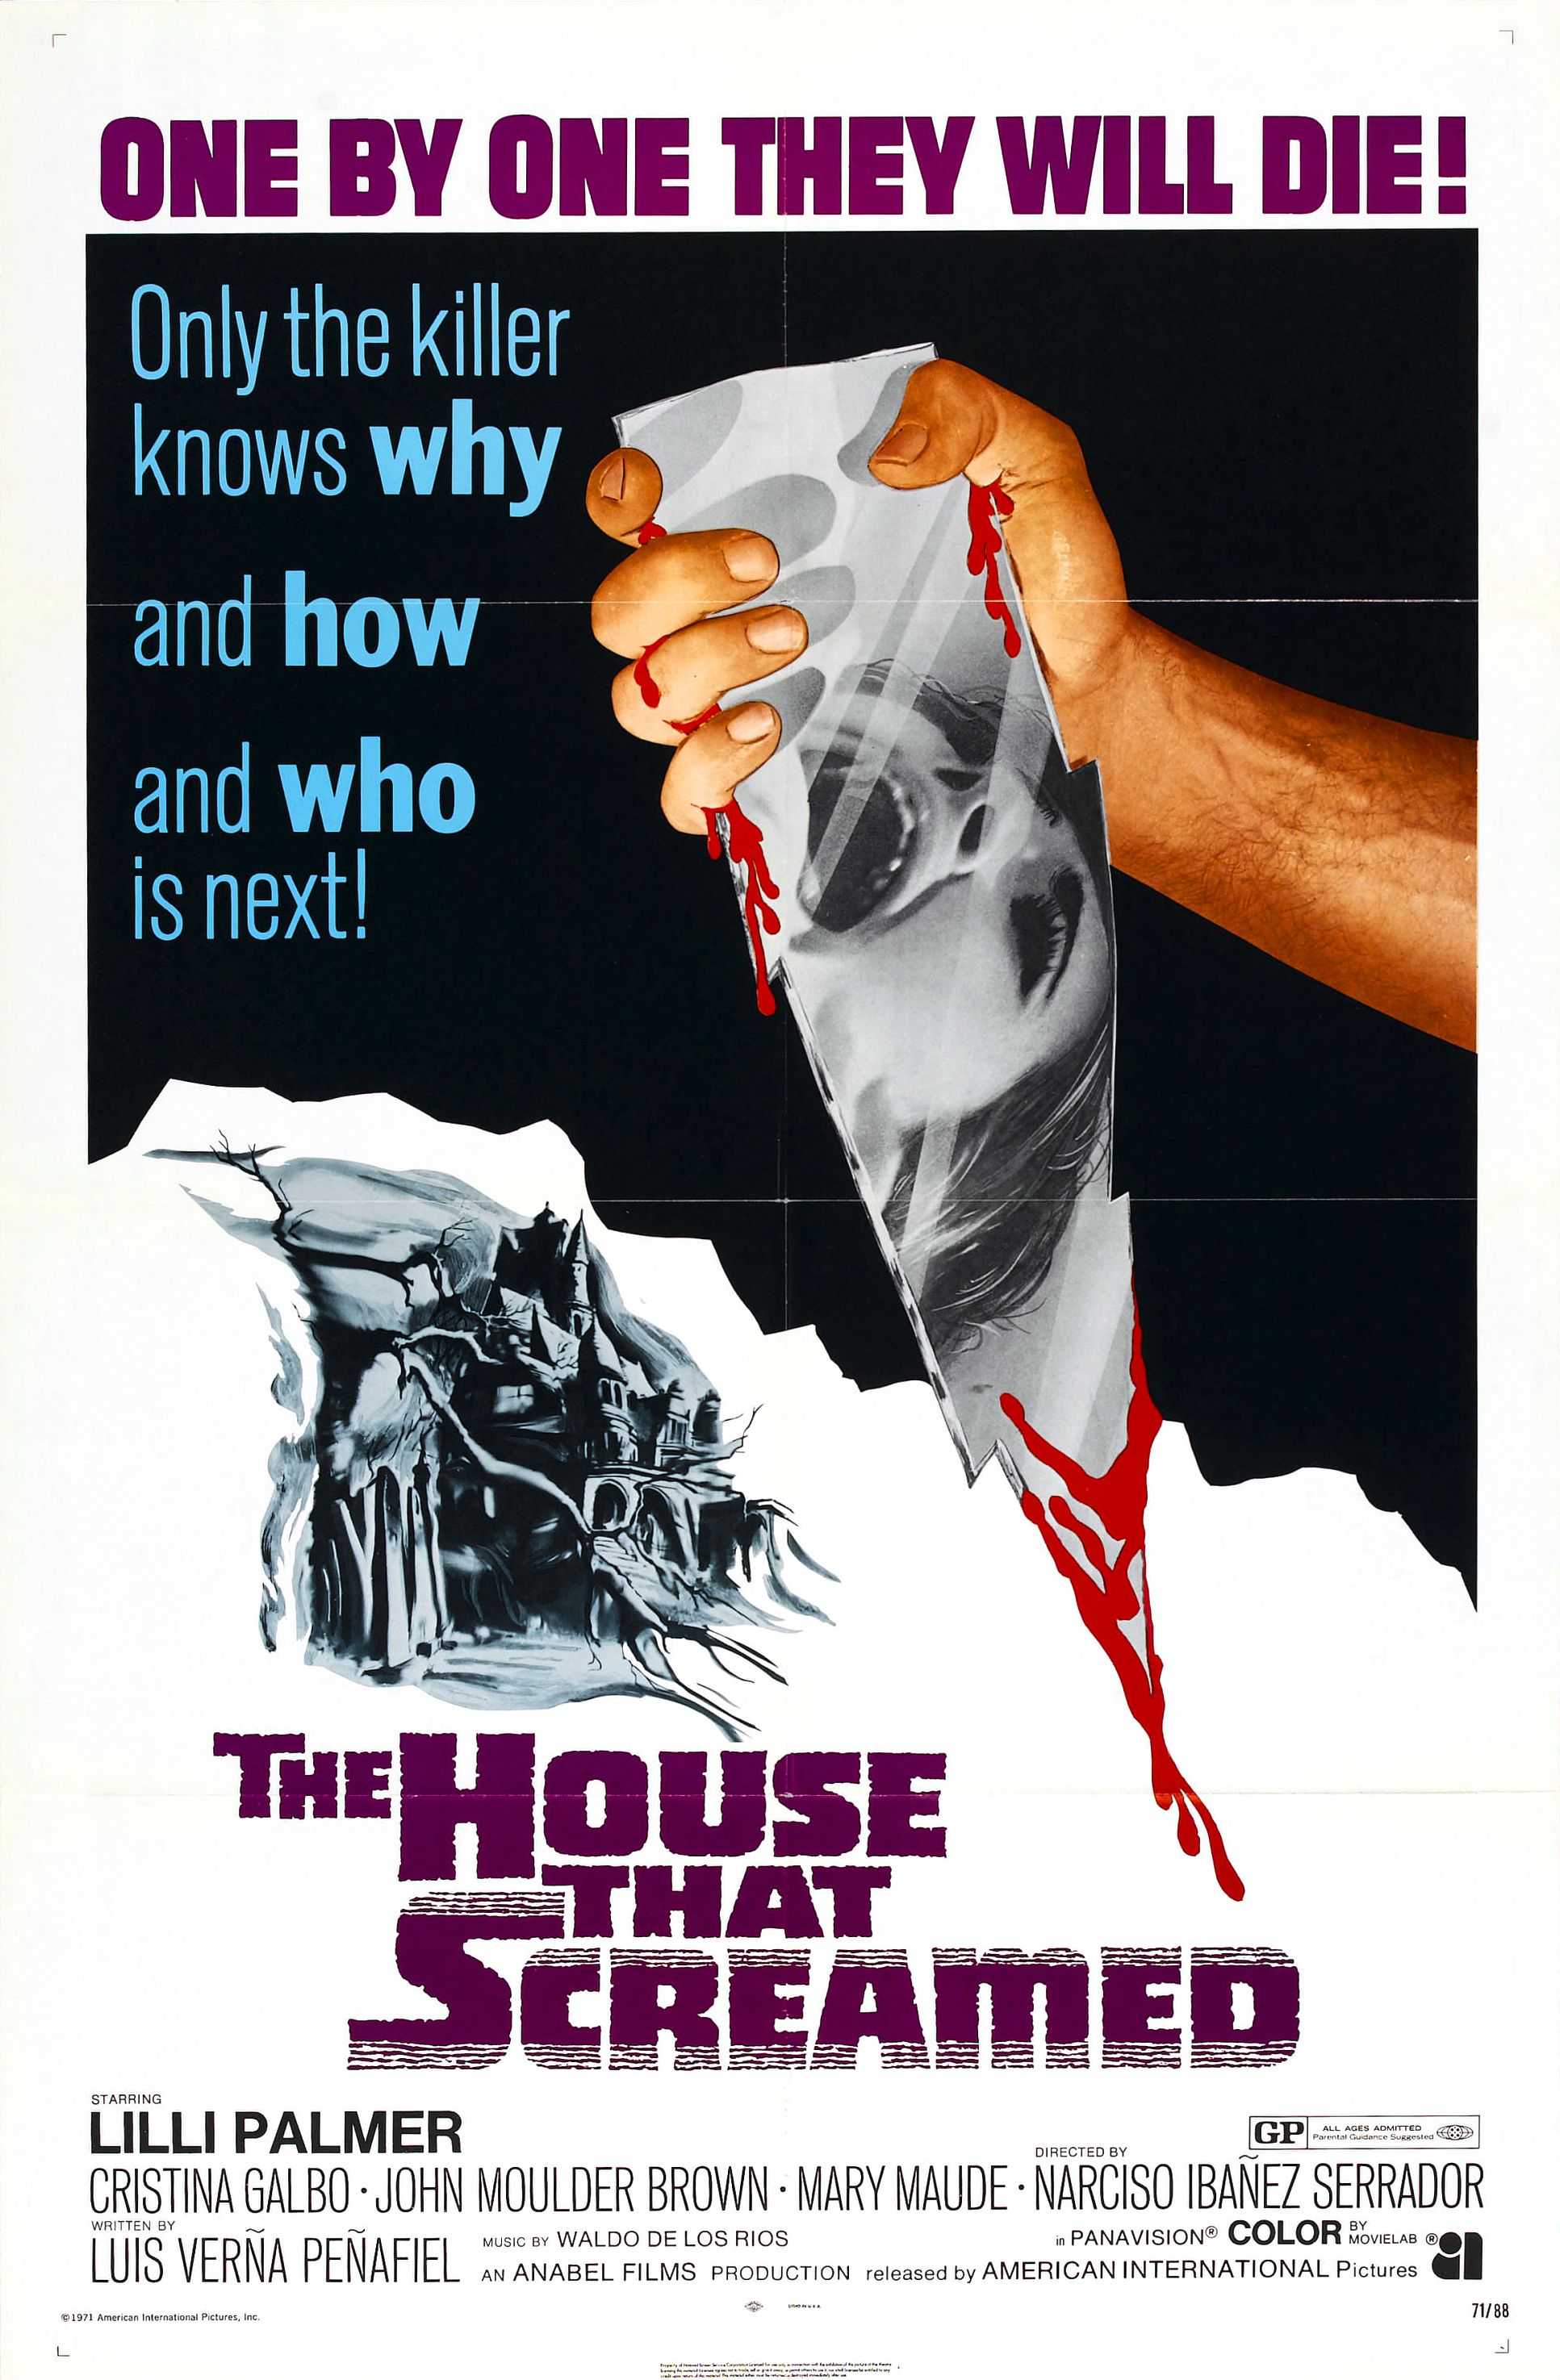 house that screamed blu ray - One By One They Will Die! Only the killer knows why and how and who is next! The House That Screamed Gipso Lilli Palmer Cristina Galbo John Moulder Brown Mary Maujde Narciso Ibmez Serrador Color Wis Verna Penafiel un Ica trur